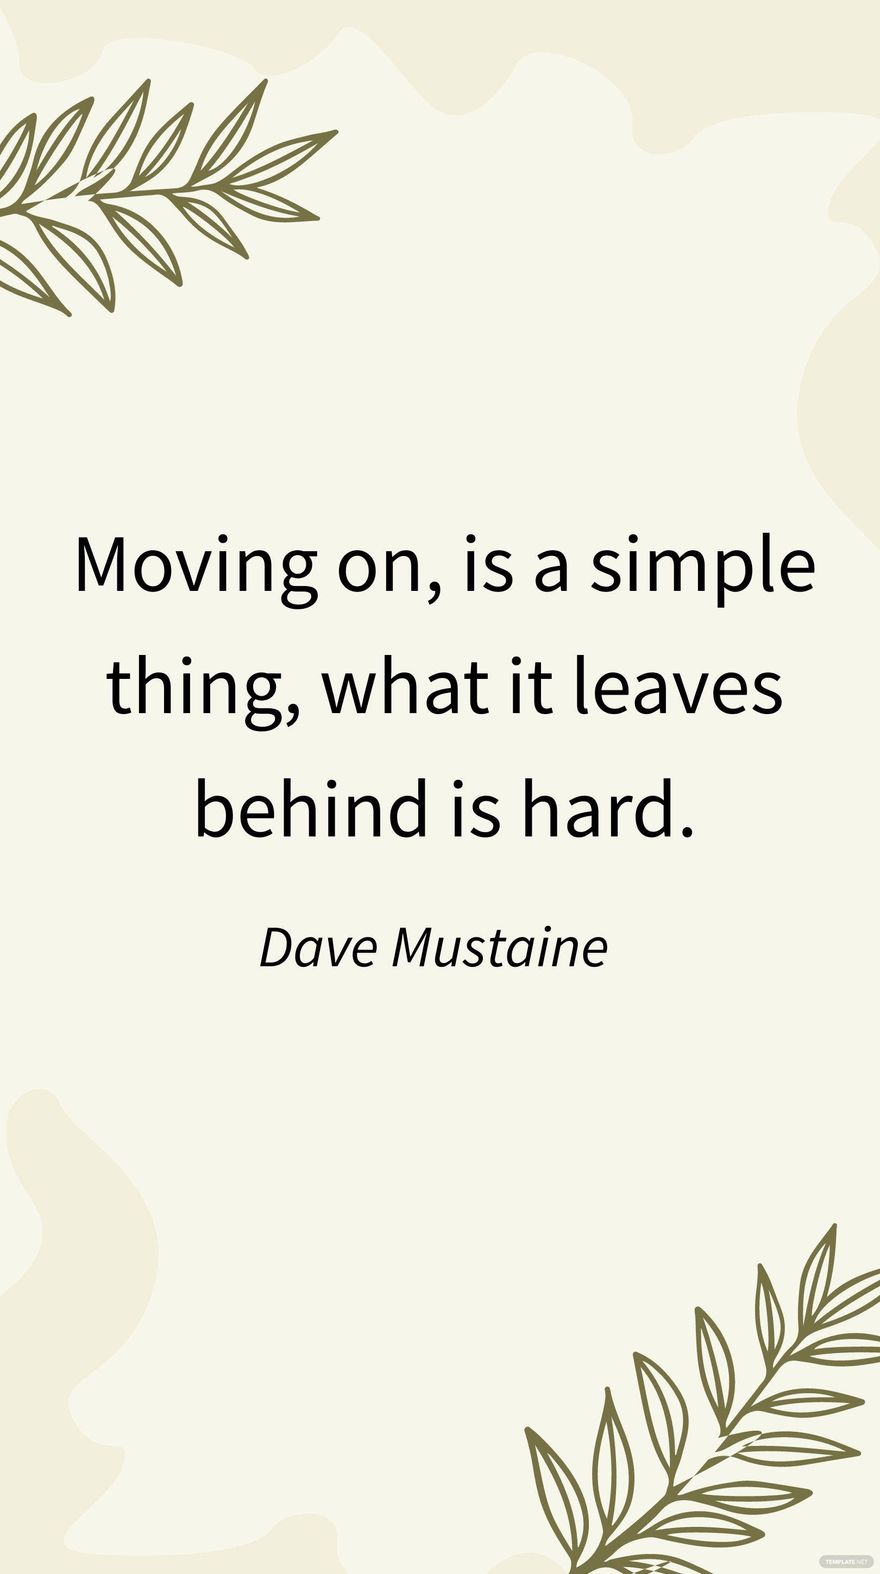 Dave Mustaine - Moving on, is a simple thing, what it leaves behind is hard.